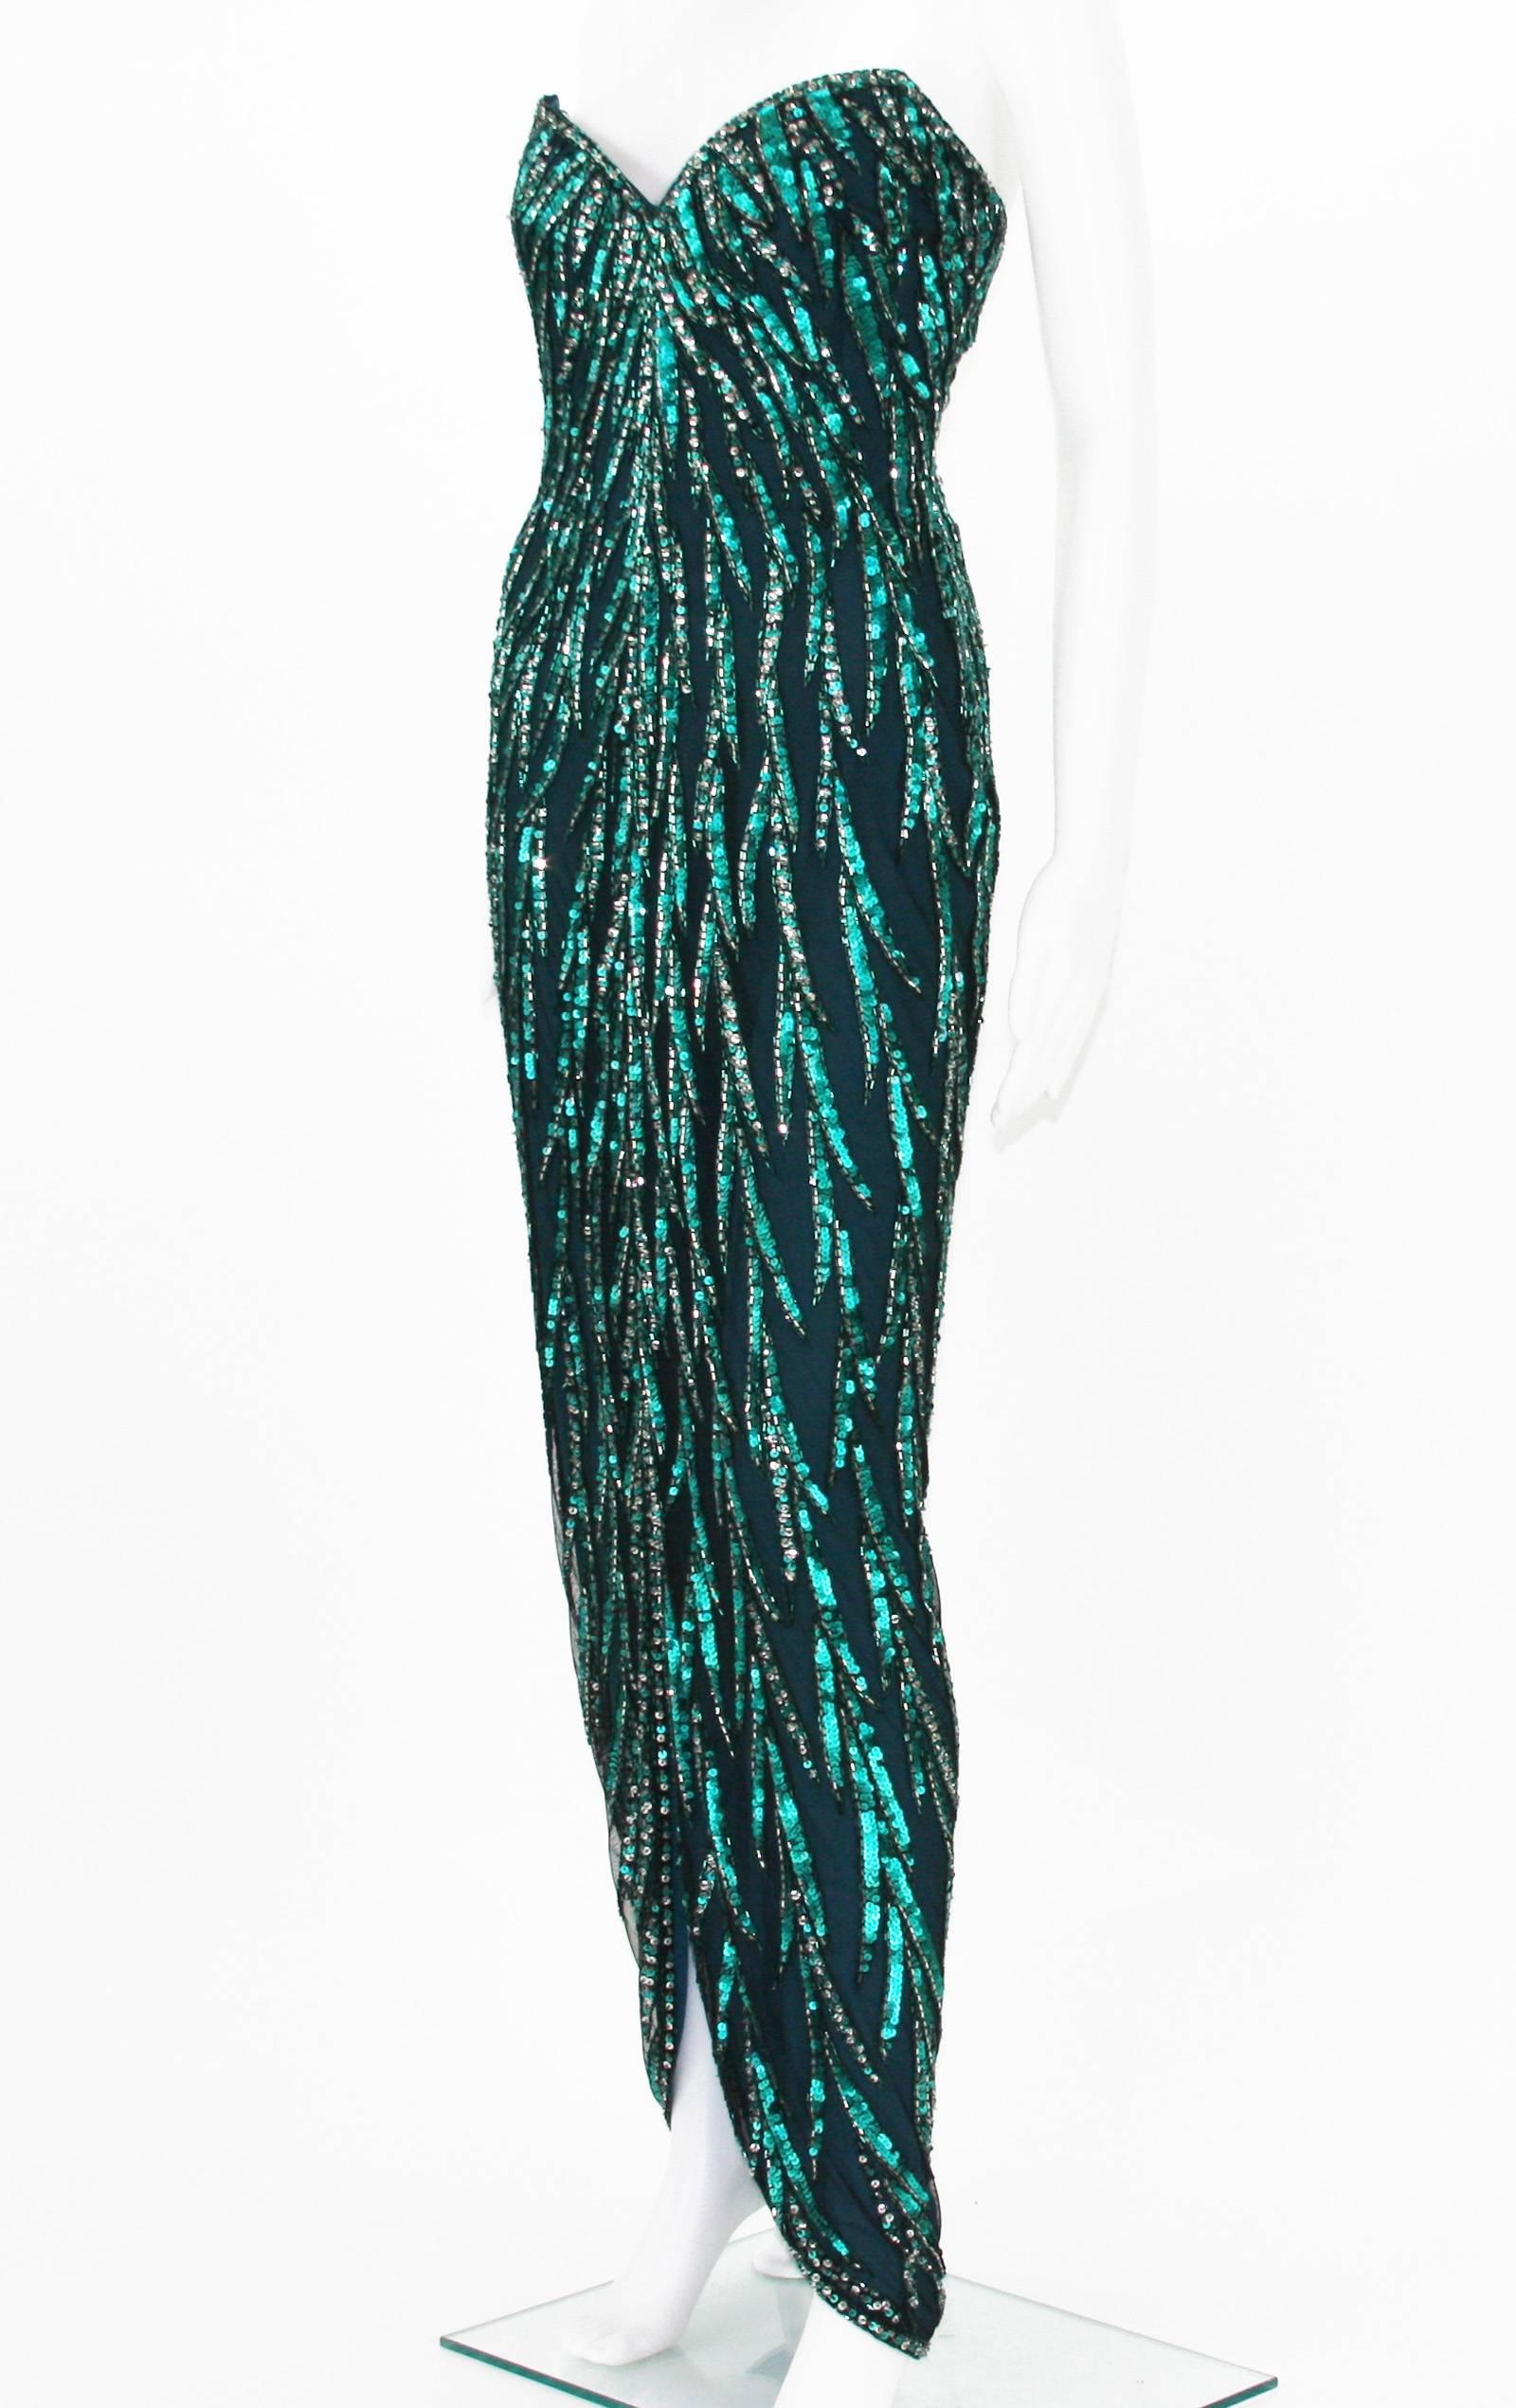 Vintage Bob Mackie Fully Beaded Evening Dress Gown
Green and Silver Beads and Sequins Over the Black Tulle, Built in Corset, Fully Lined, Back zip Closure.
Size Label Missing. Measurements: Length - 50 inches (from under the arm and down), Bust -